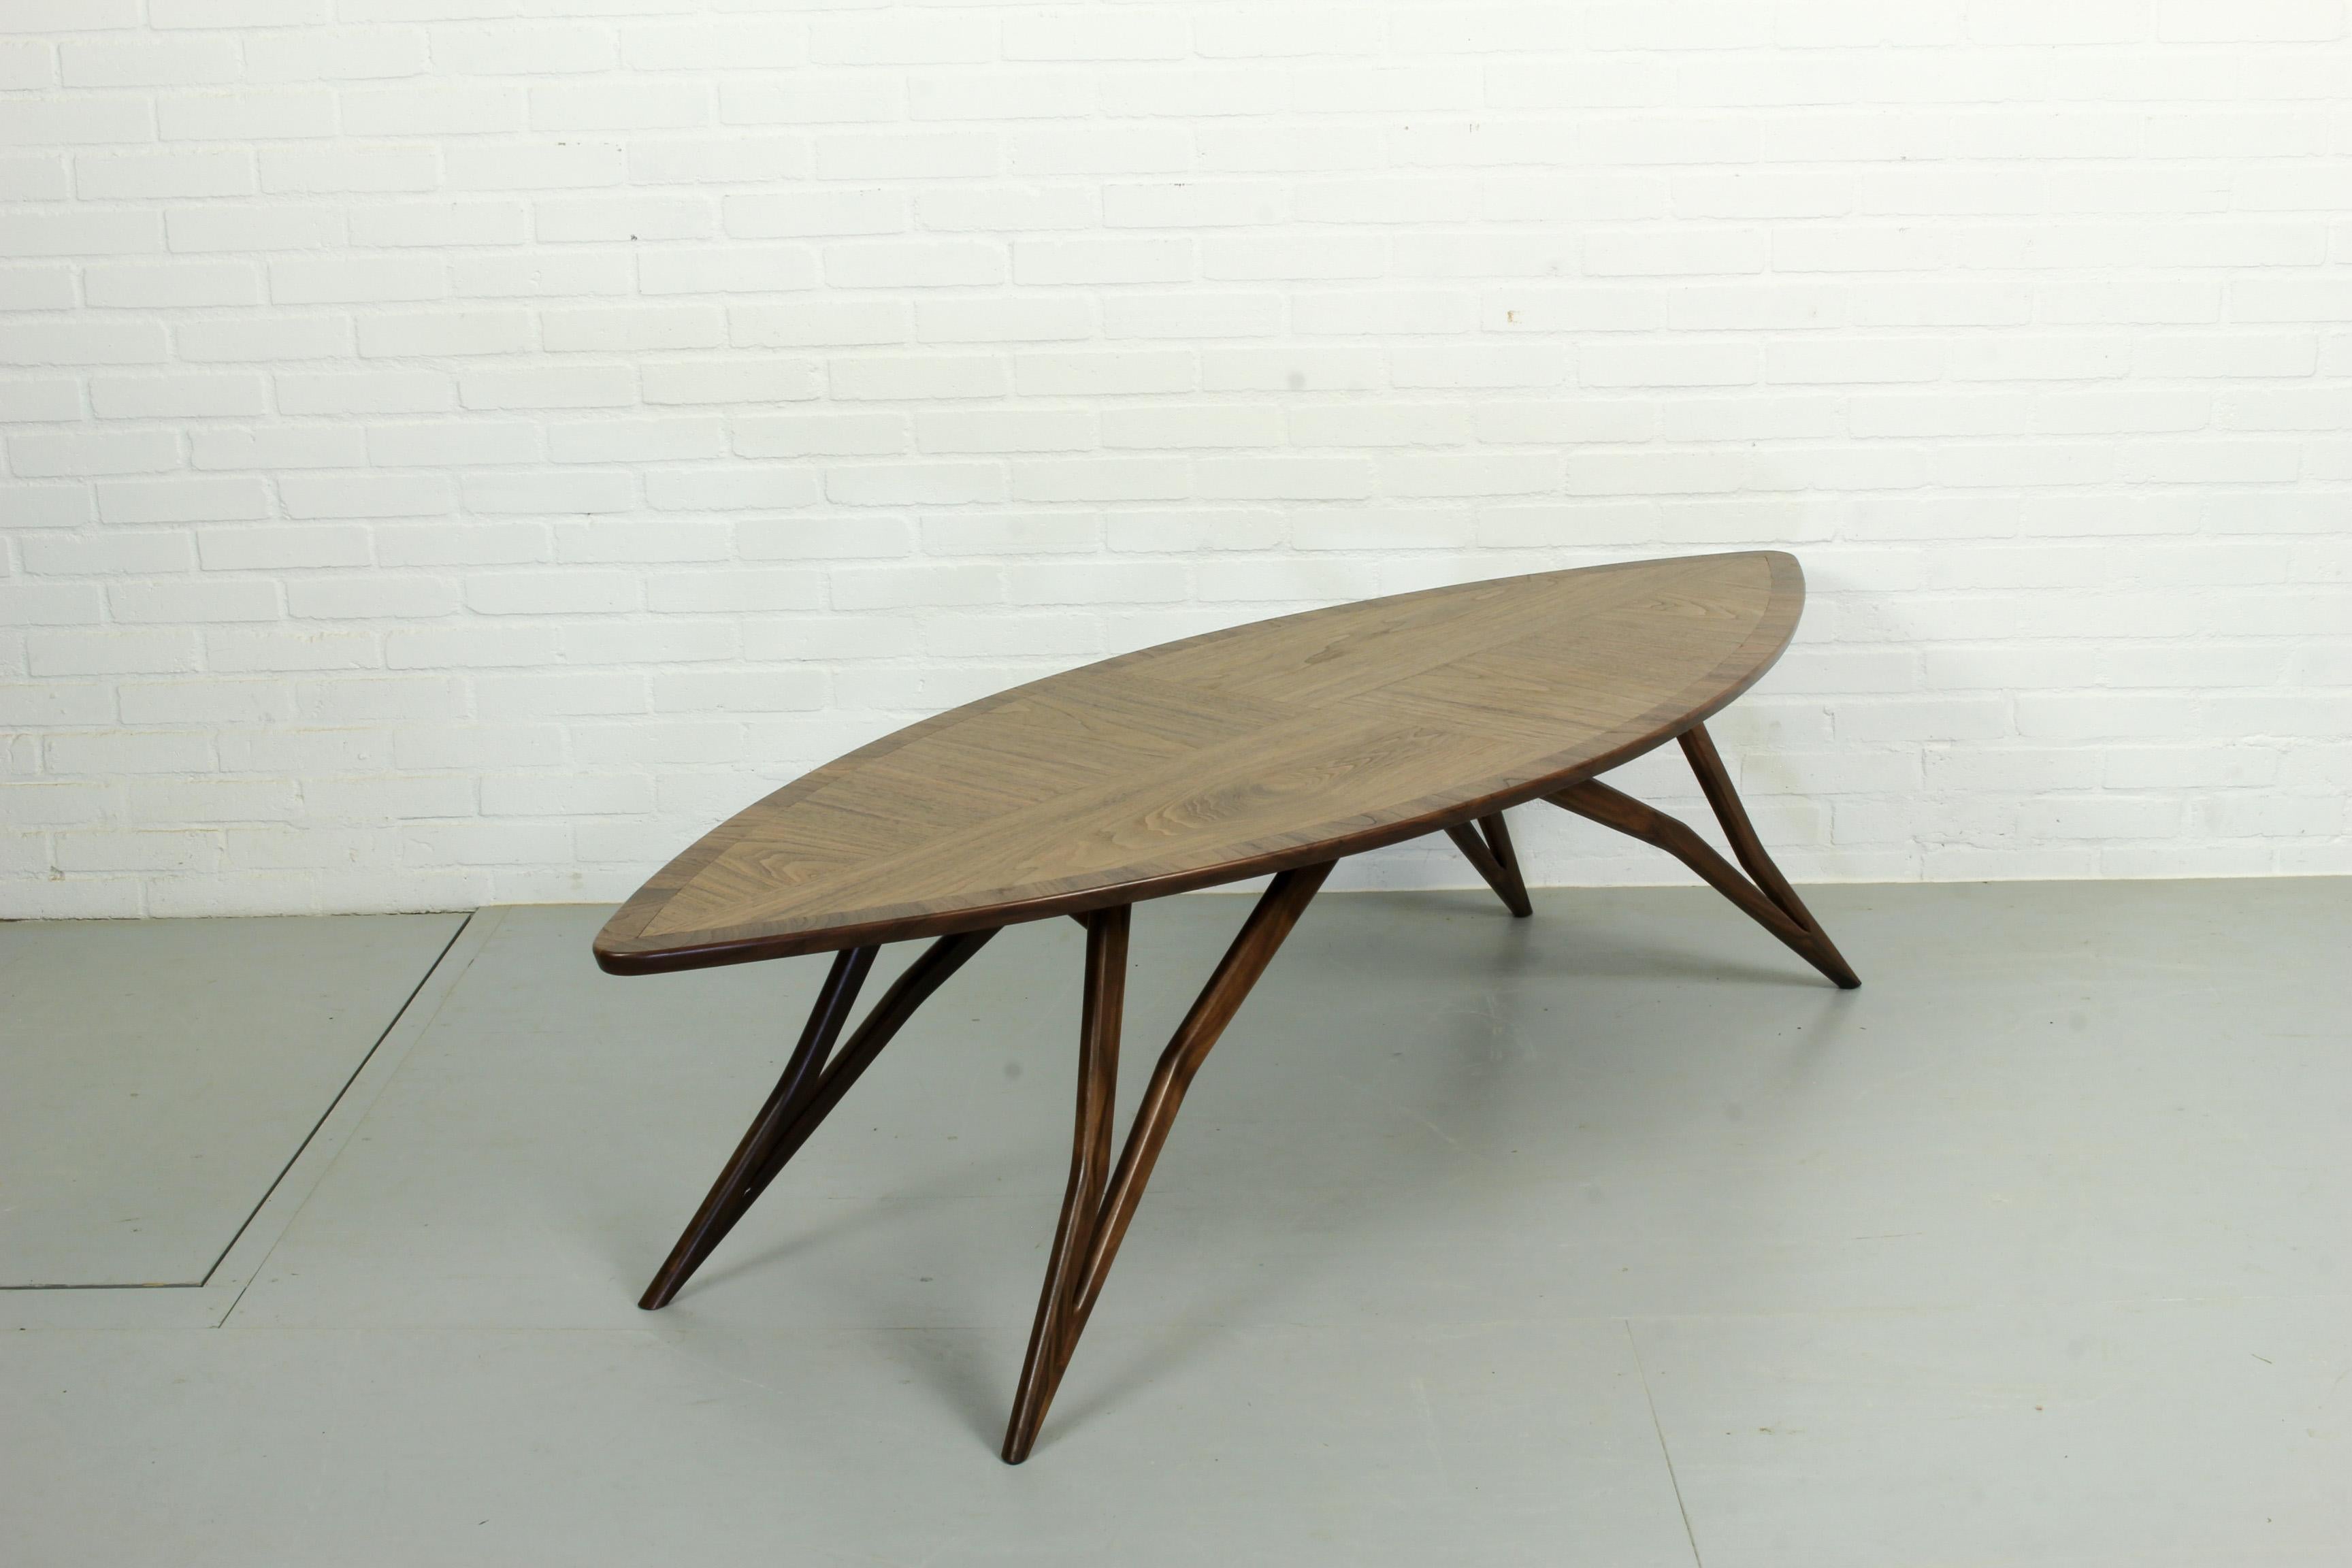 Midcentury Style Curved American Nut Coffee Table In Excellent Condition For Sale In Appeltern, Gelderland